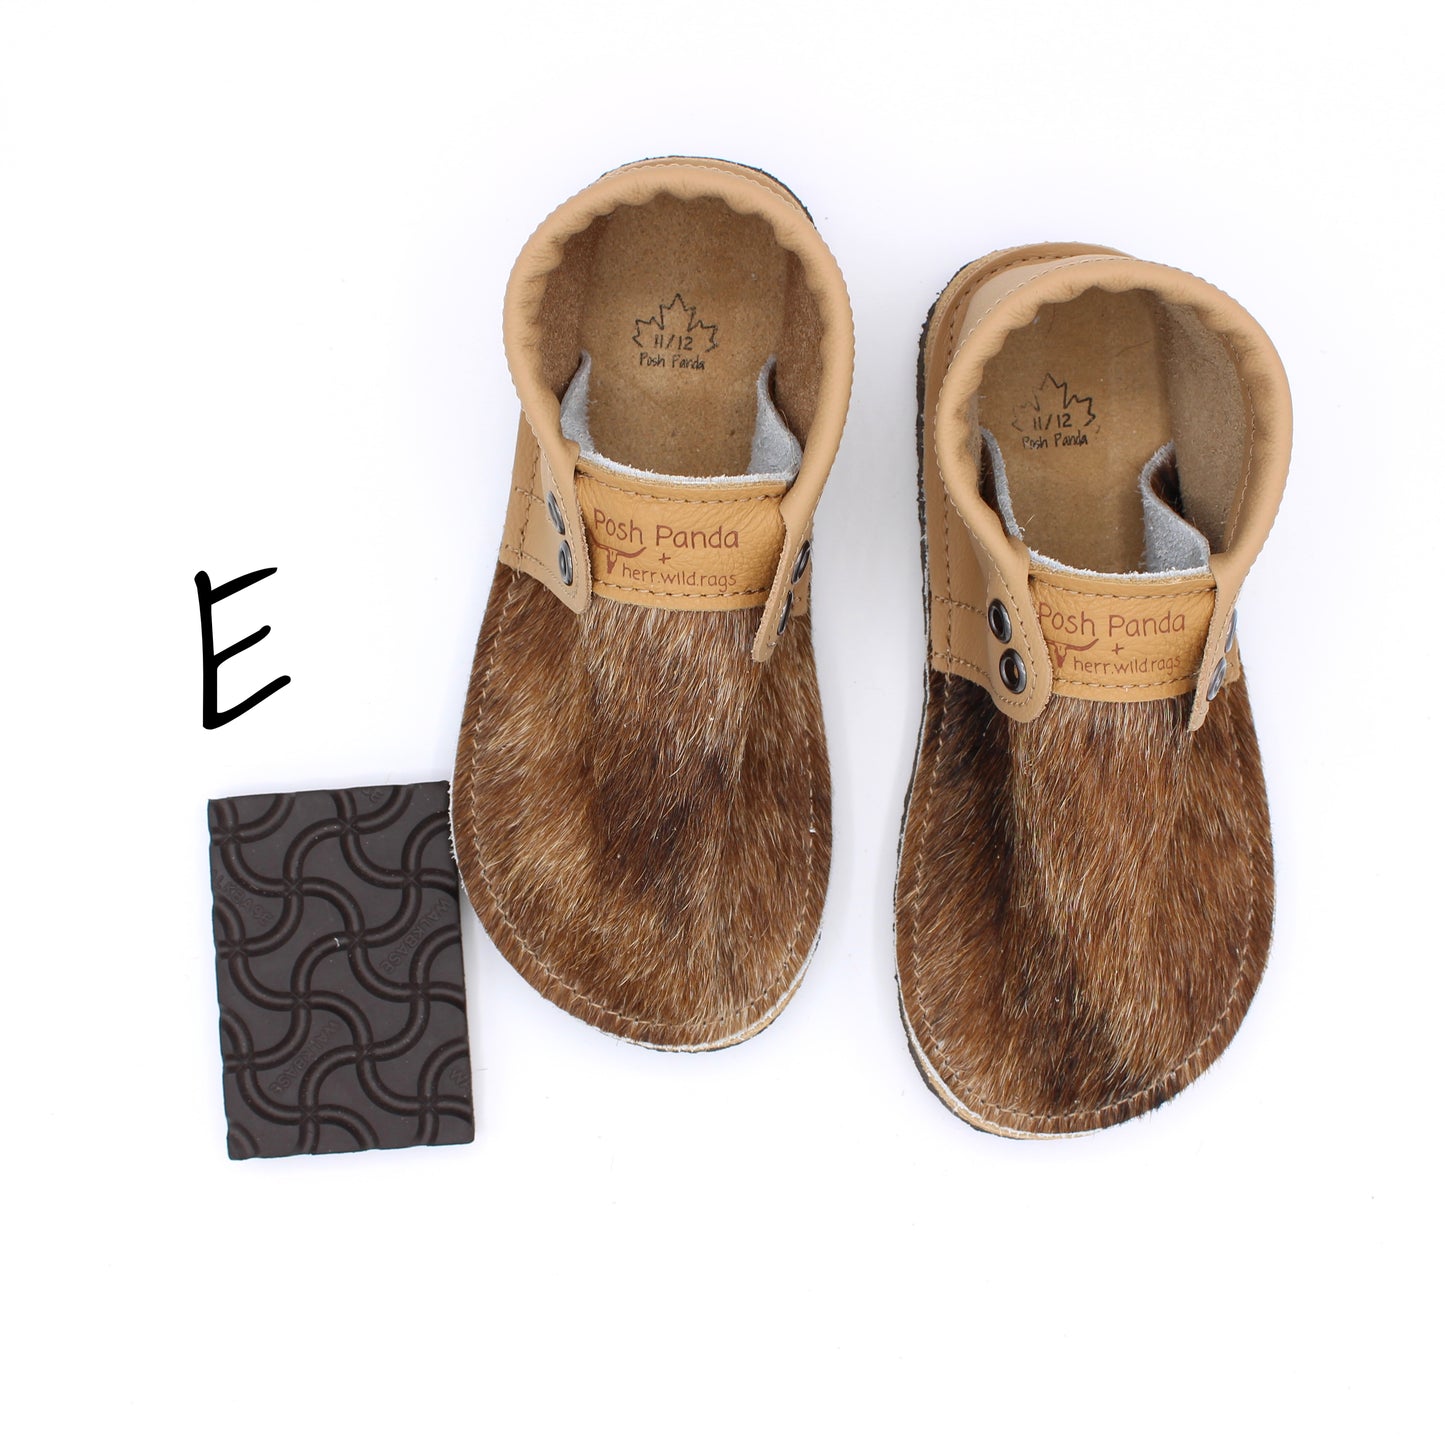 Hair Hide Mocs -  TODDLER - Size 11/12 (RUGGED Sole)